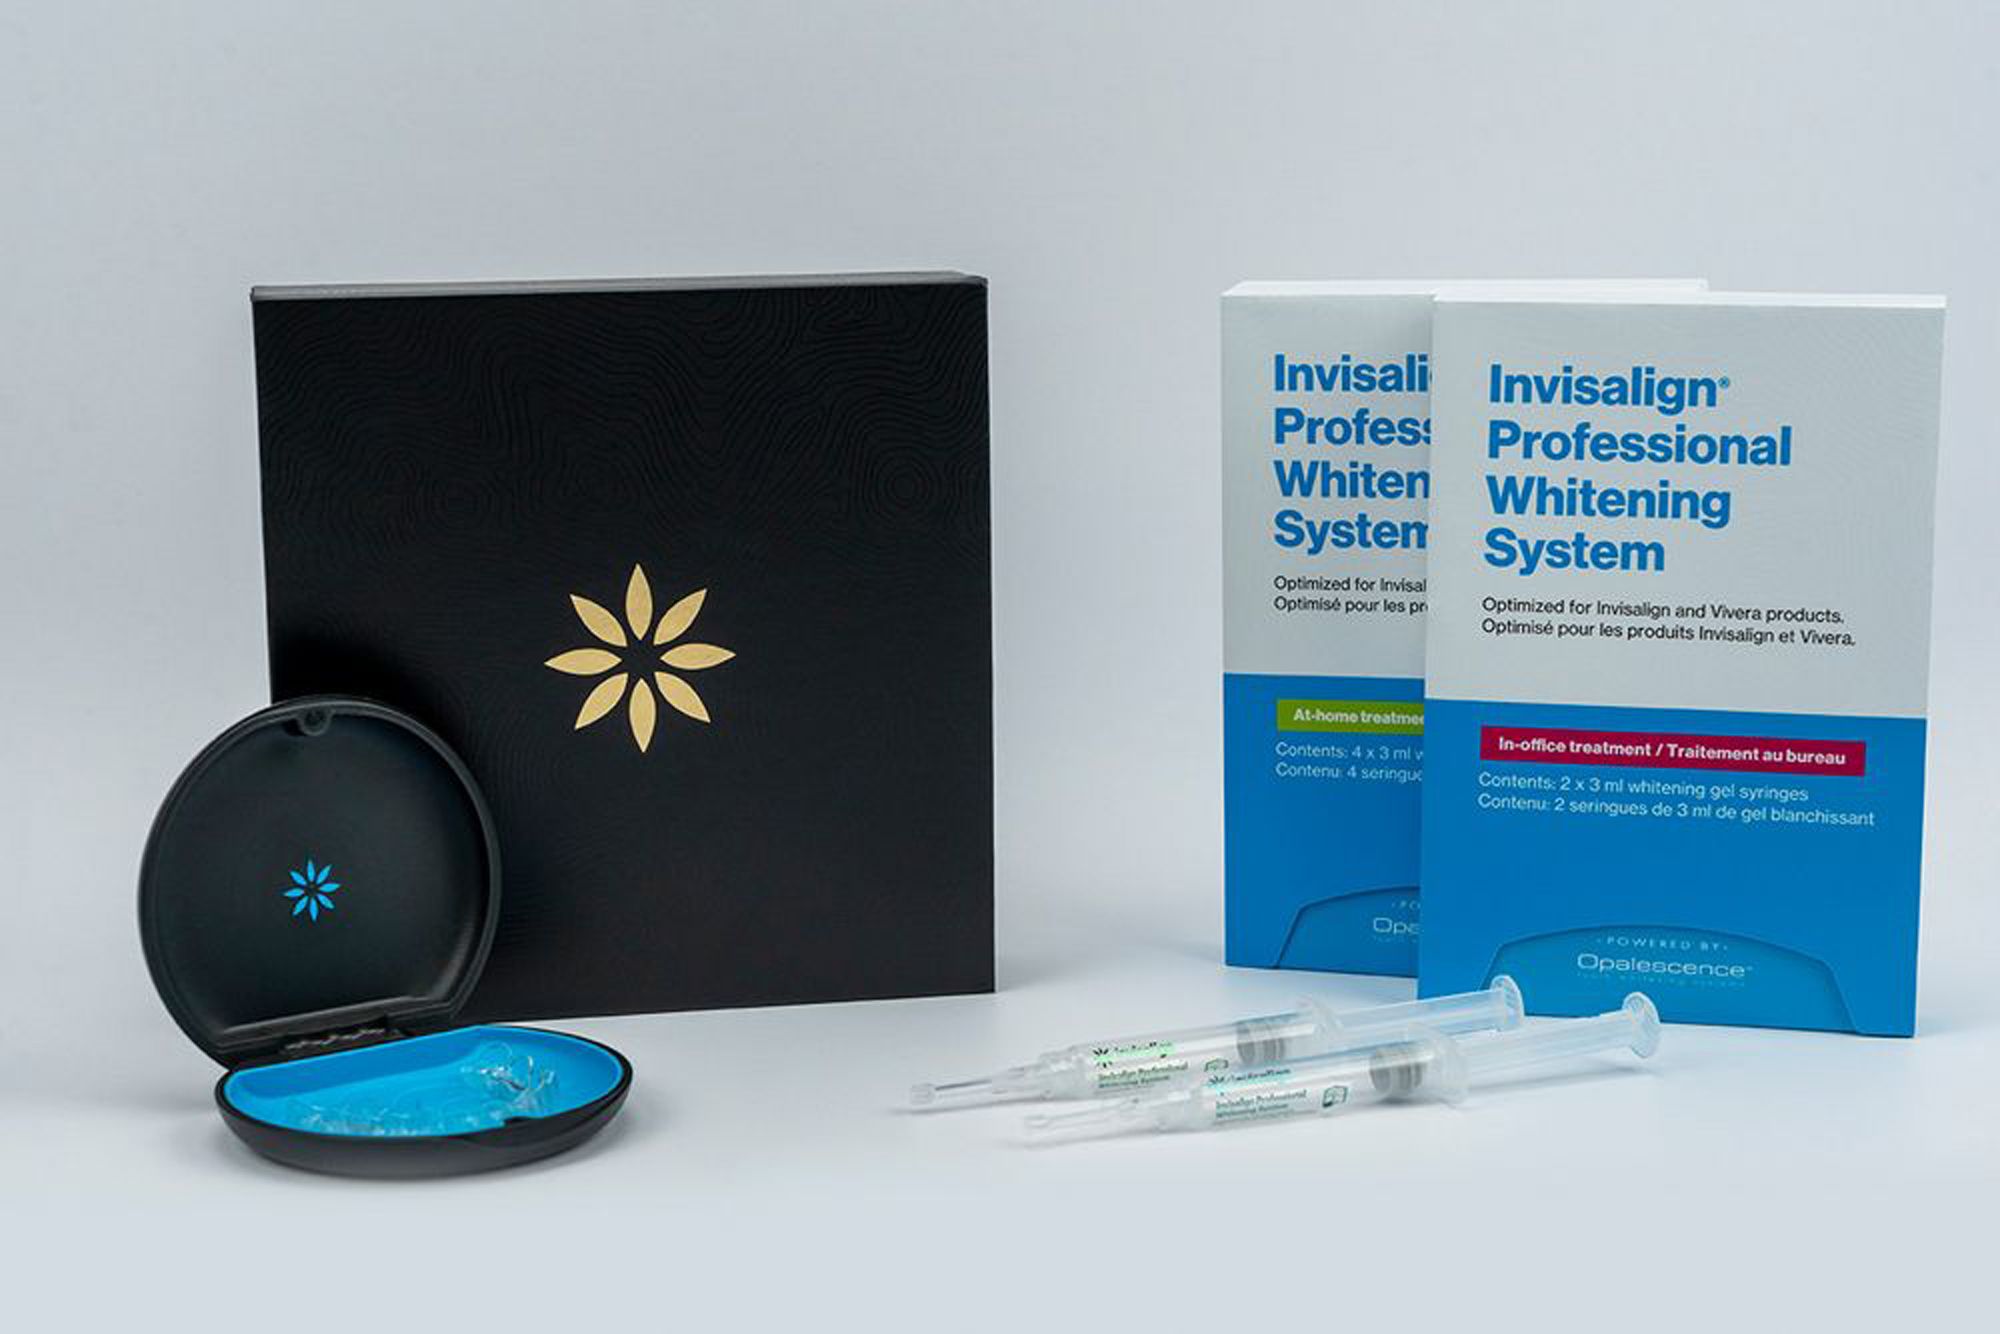 The Invisalign Professional Whitening System